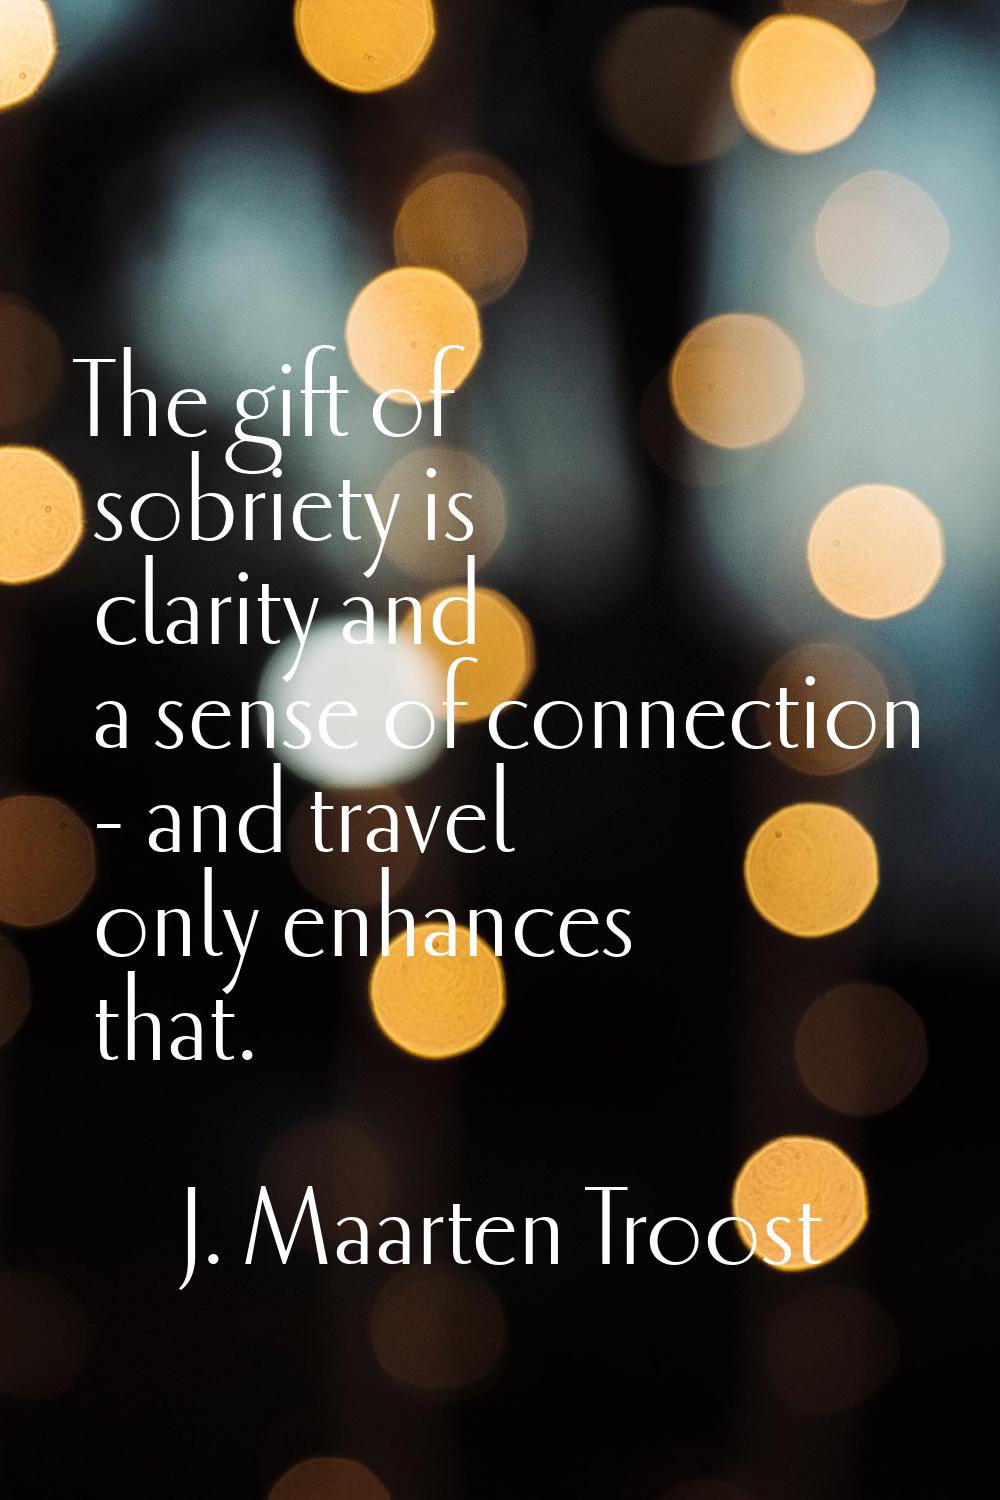 The gift of sobriety is clarity and a sense of connection - and travel only enhances that.